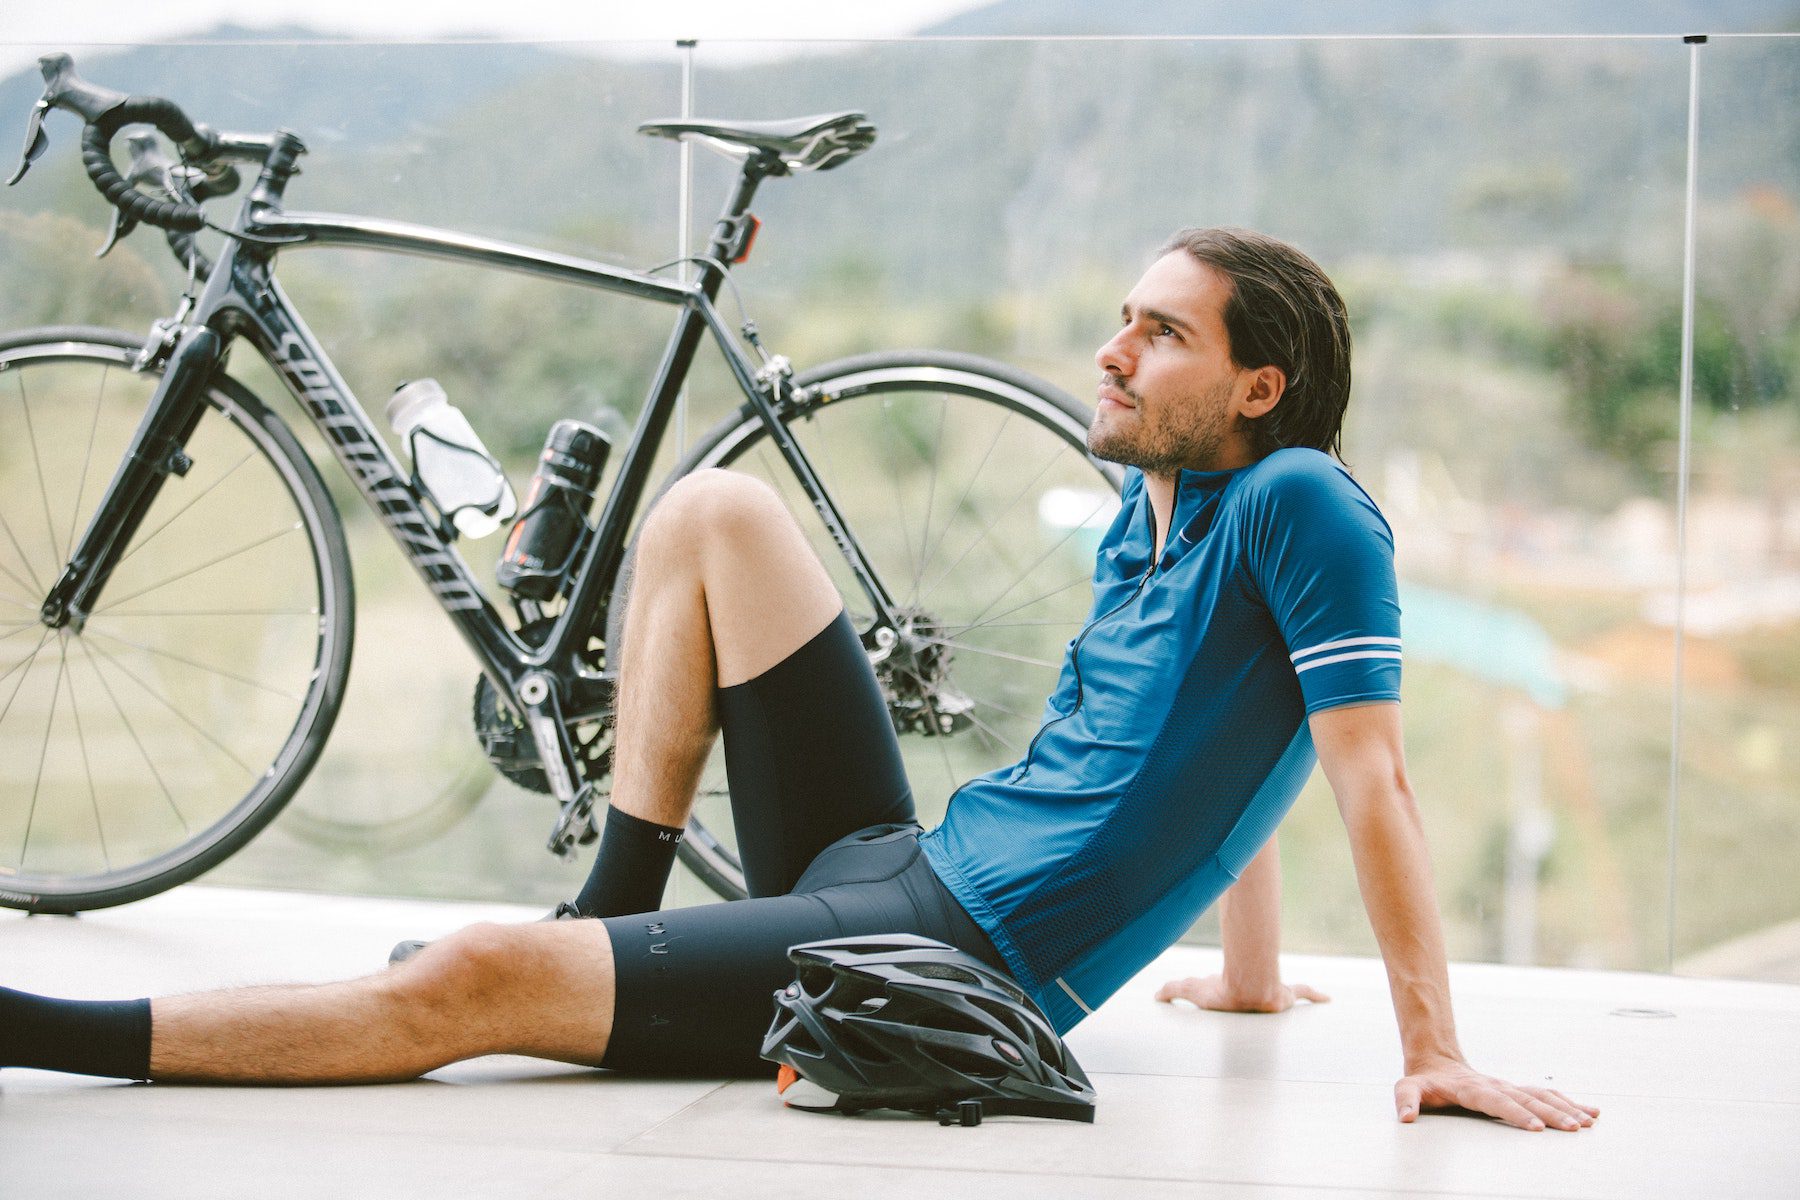 Cyclist in blue athletic clothing and black cycling shorts, resting on a glass-lined balcony beside a black bike.